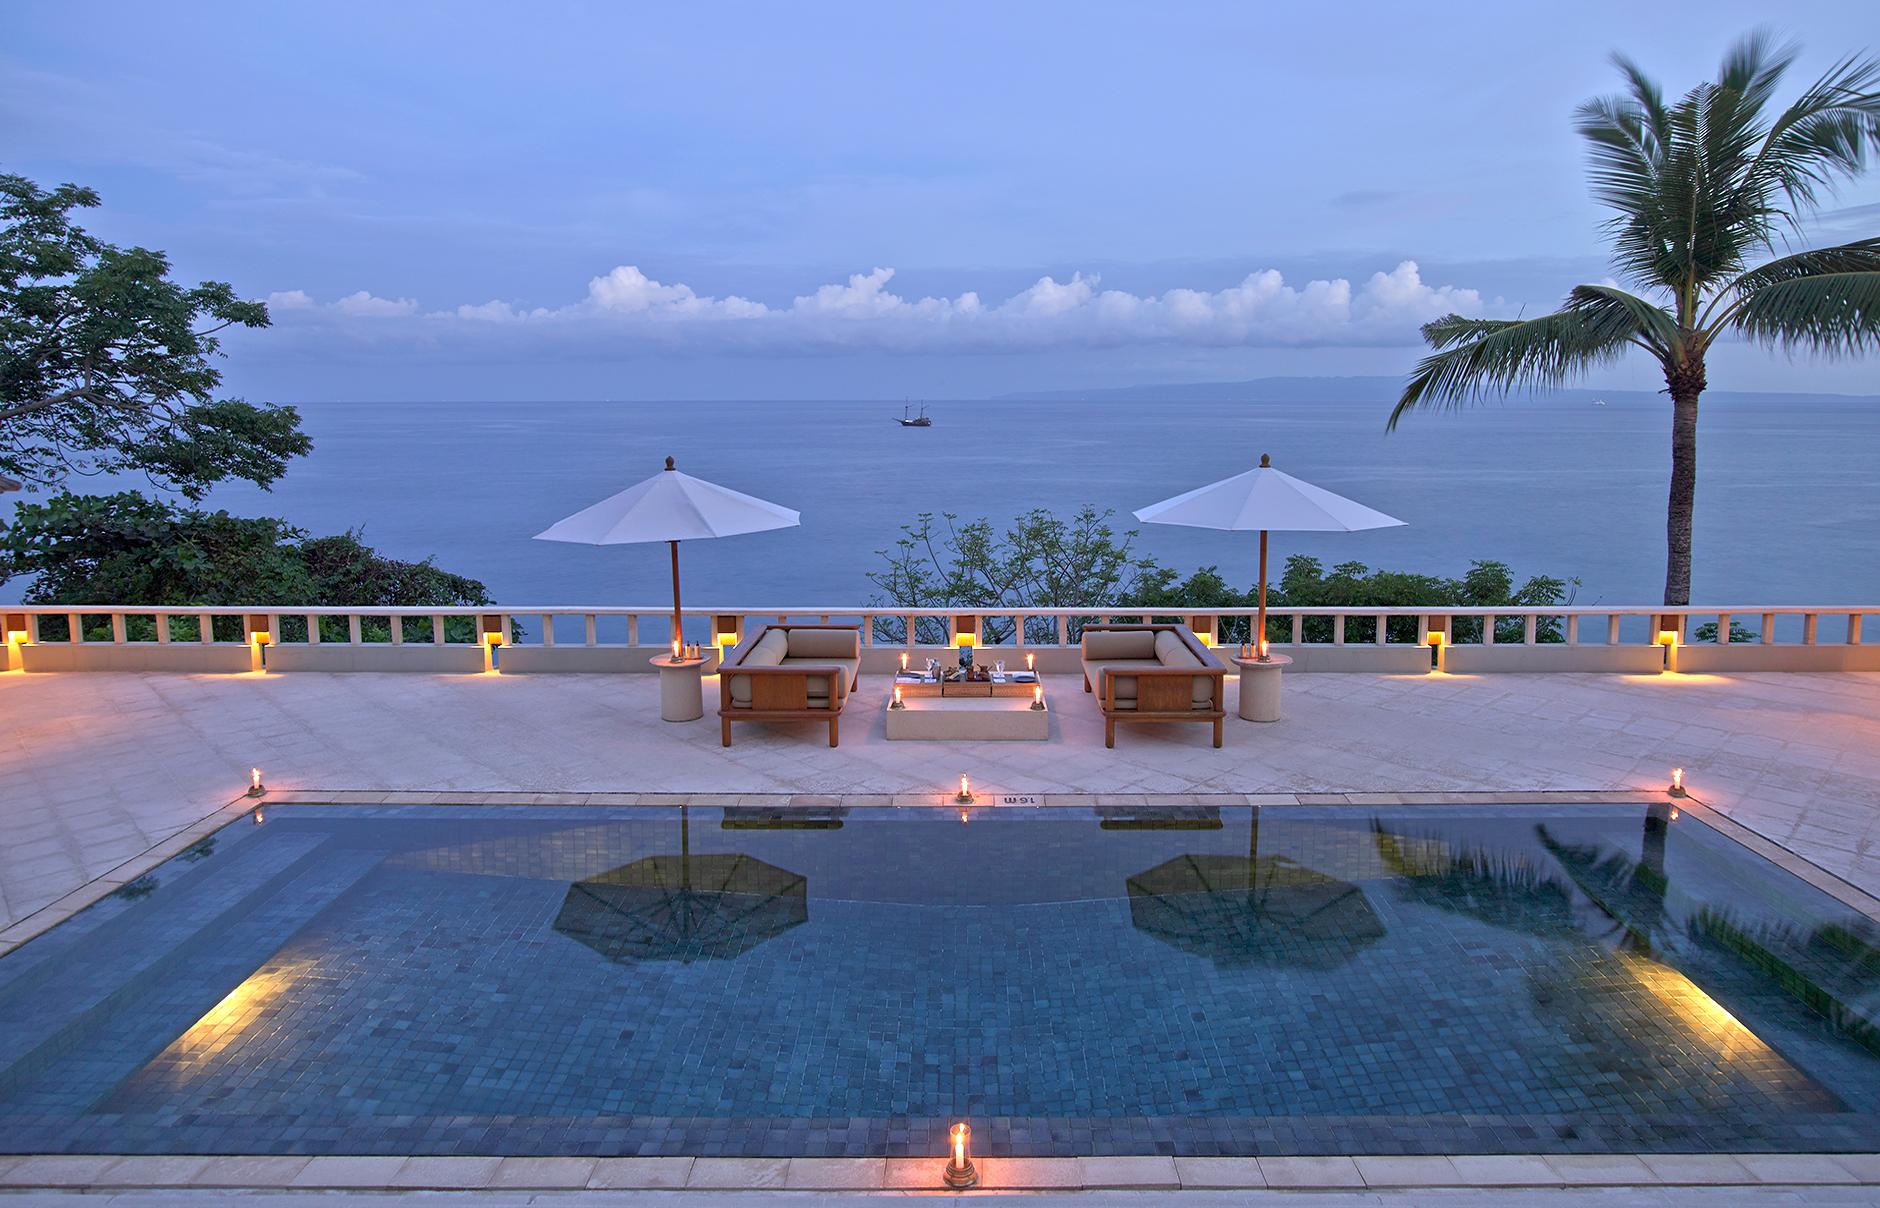 Discover Bali in a different way at Soori refuge, an ocean of wellbeing ...